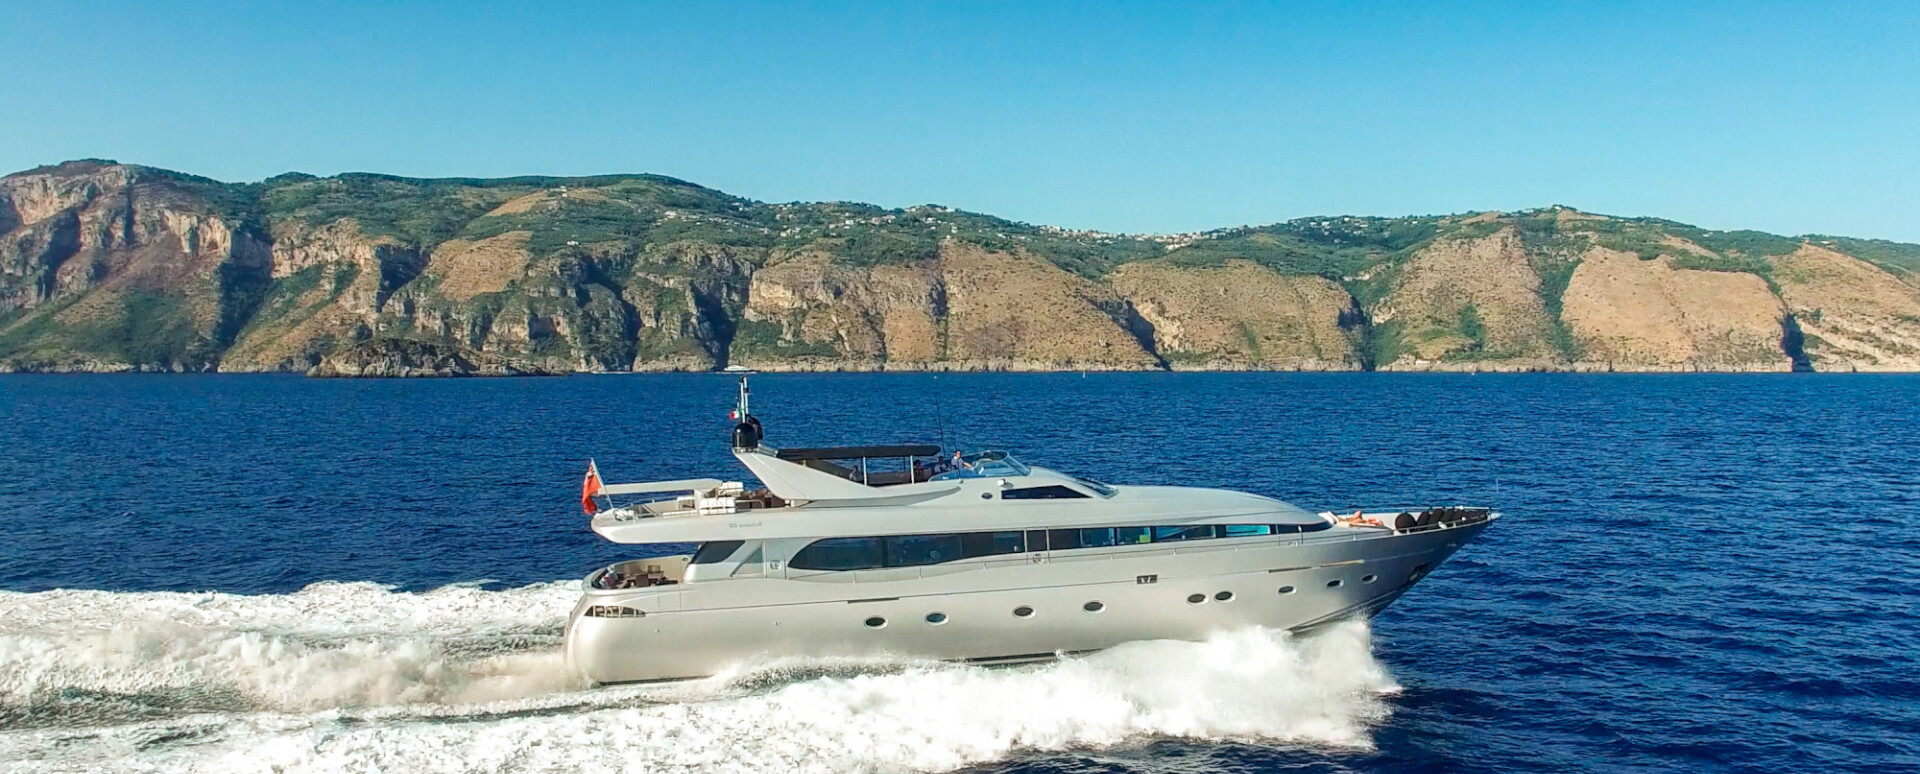                                                                                                     New to the Market!  M/Y Naughty By Nature
                                                                                            